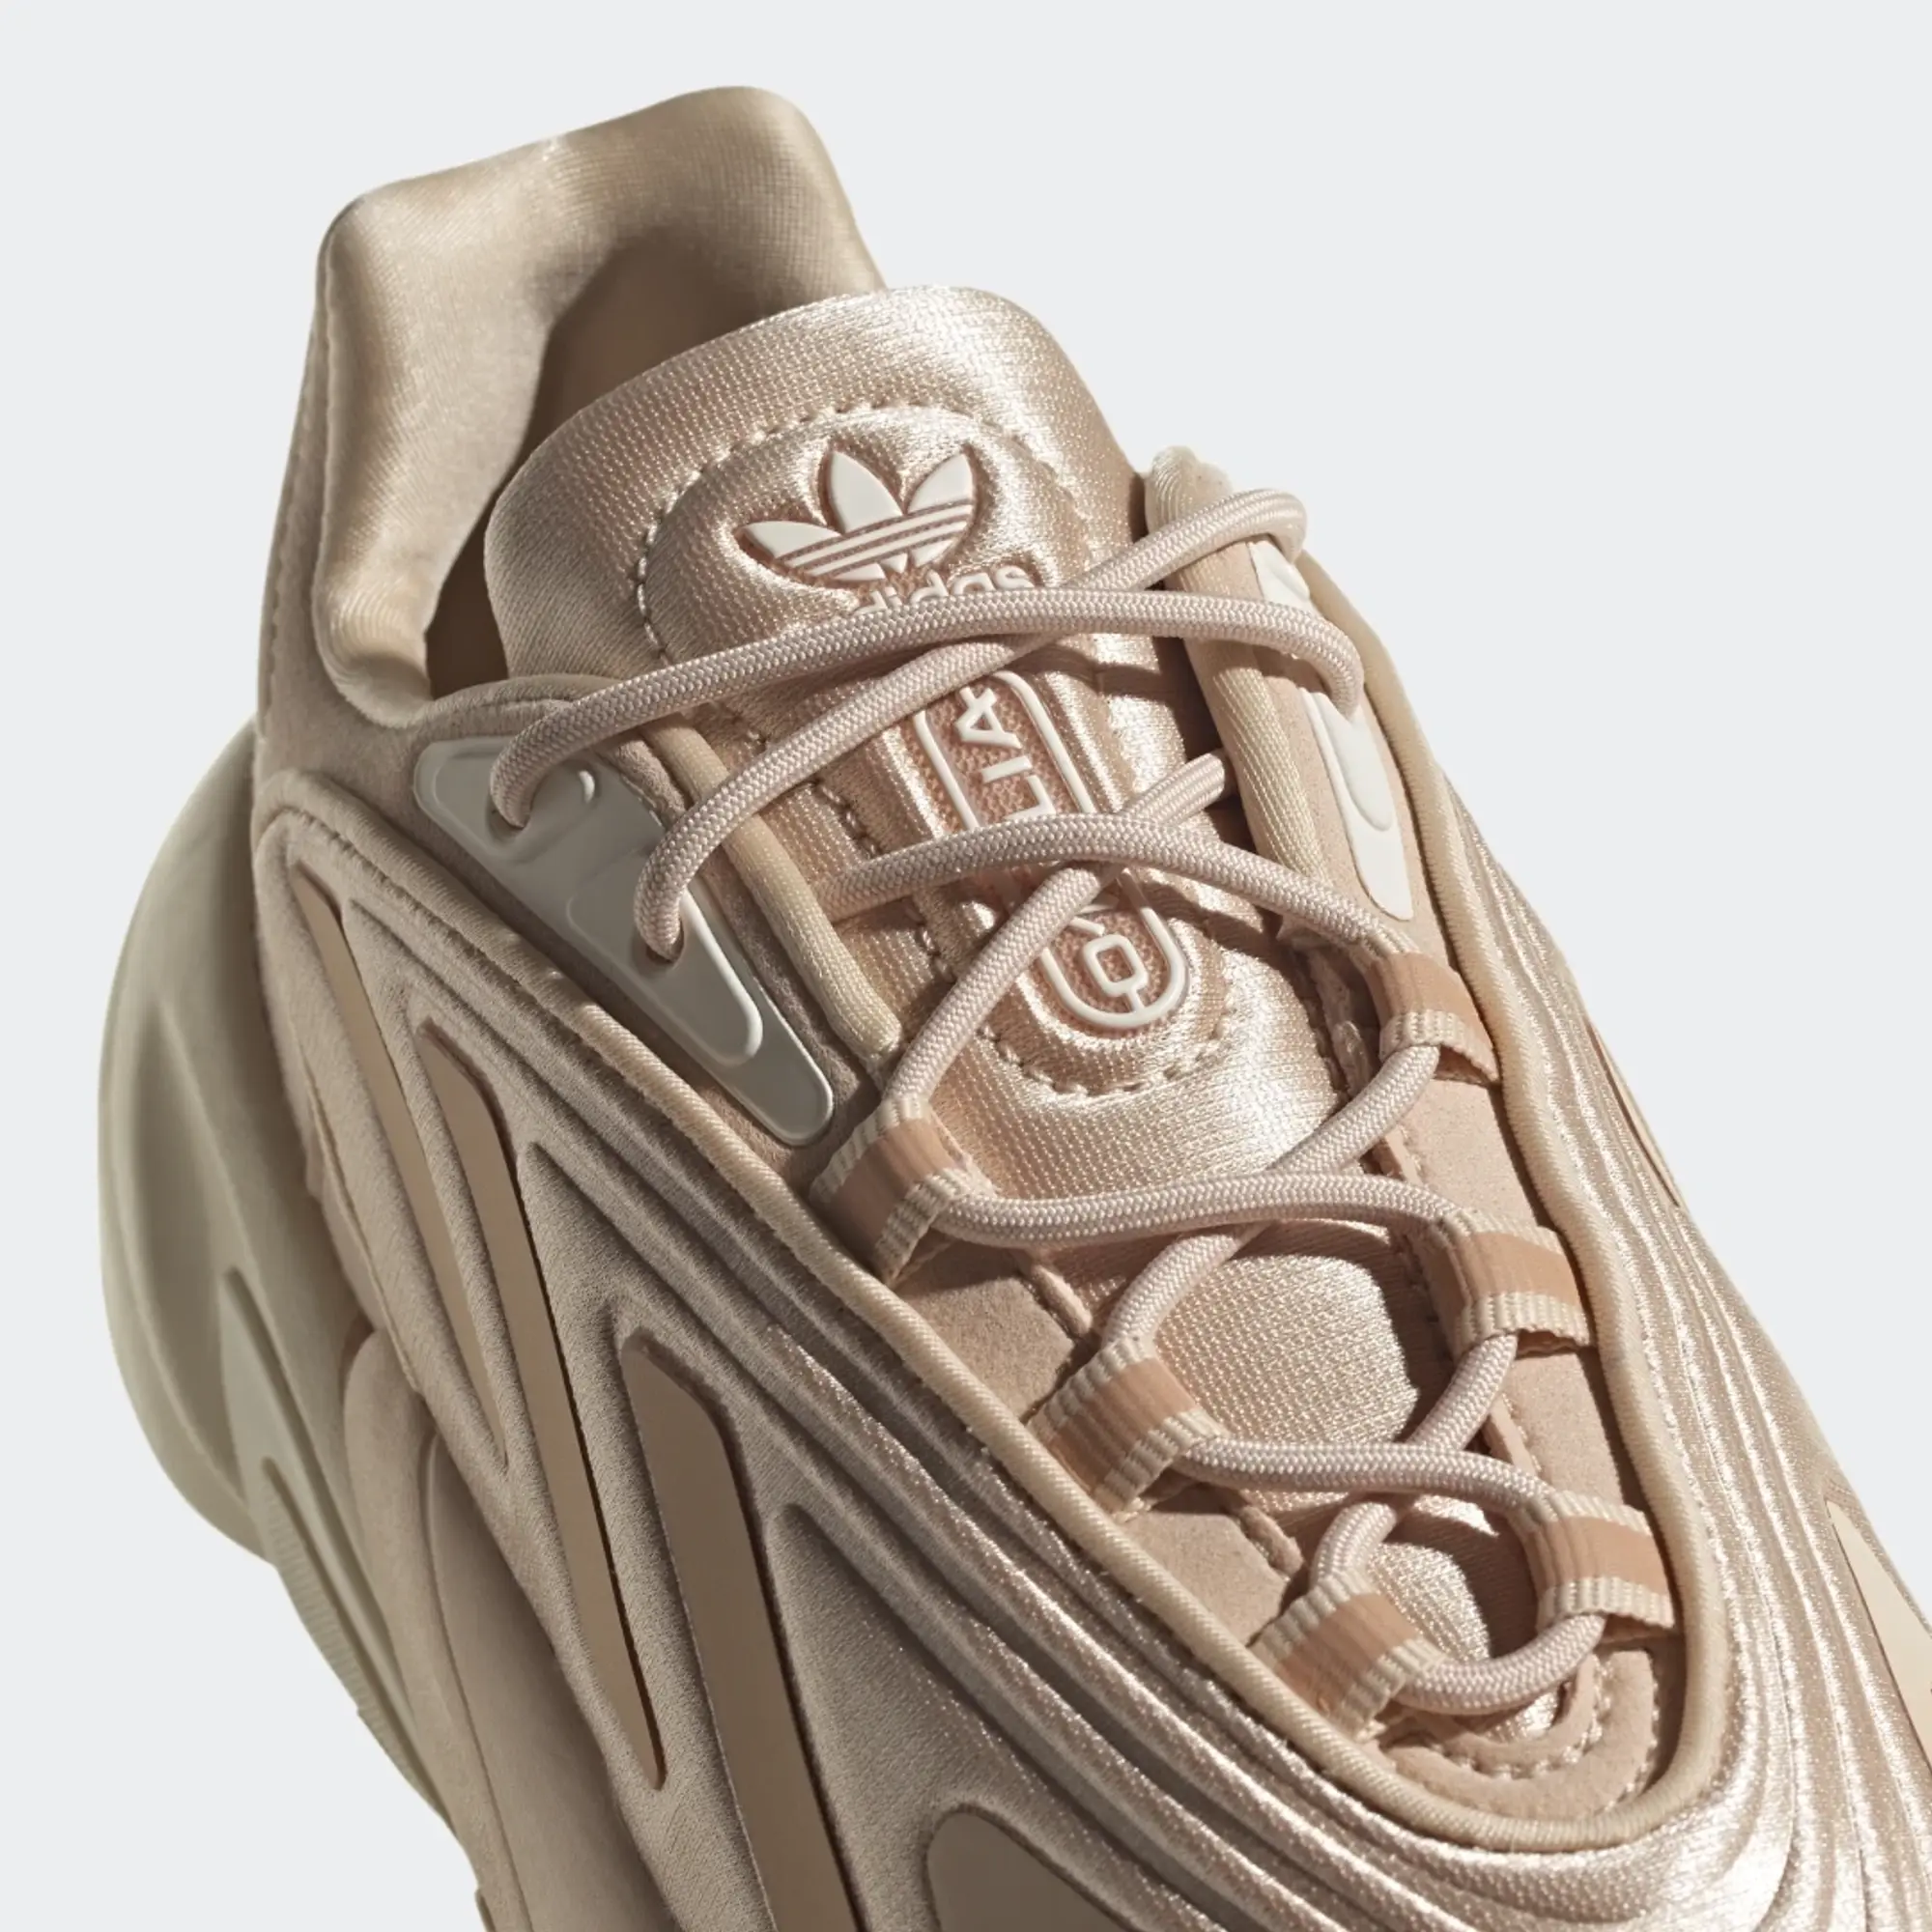 Adidas Originals Ozelia Trainers In Beige And Oatmeal-Neutral